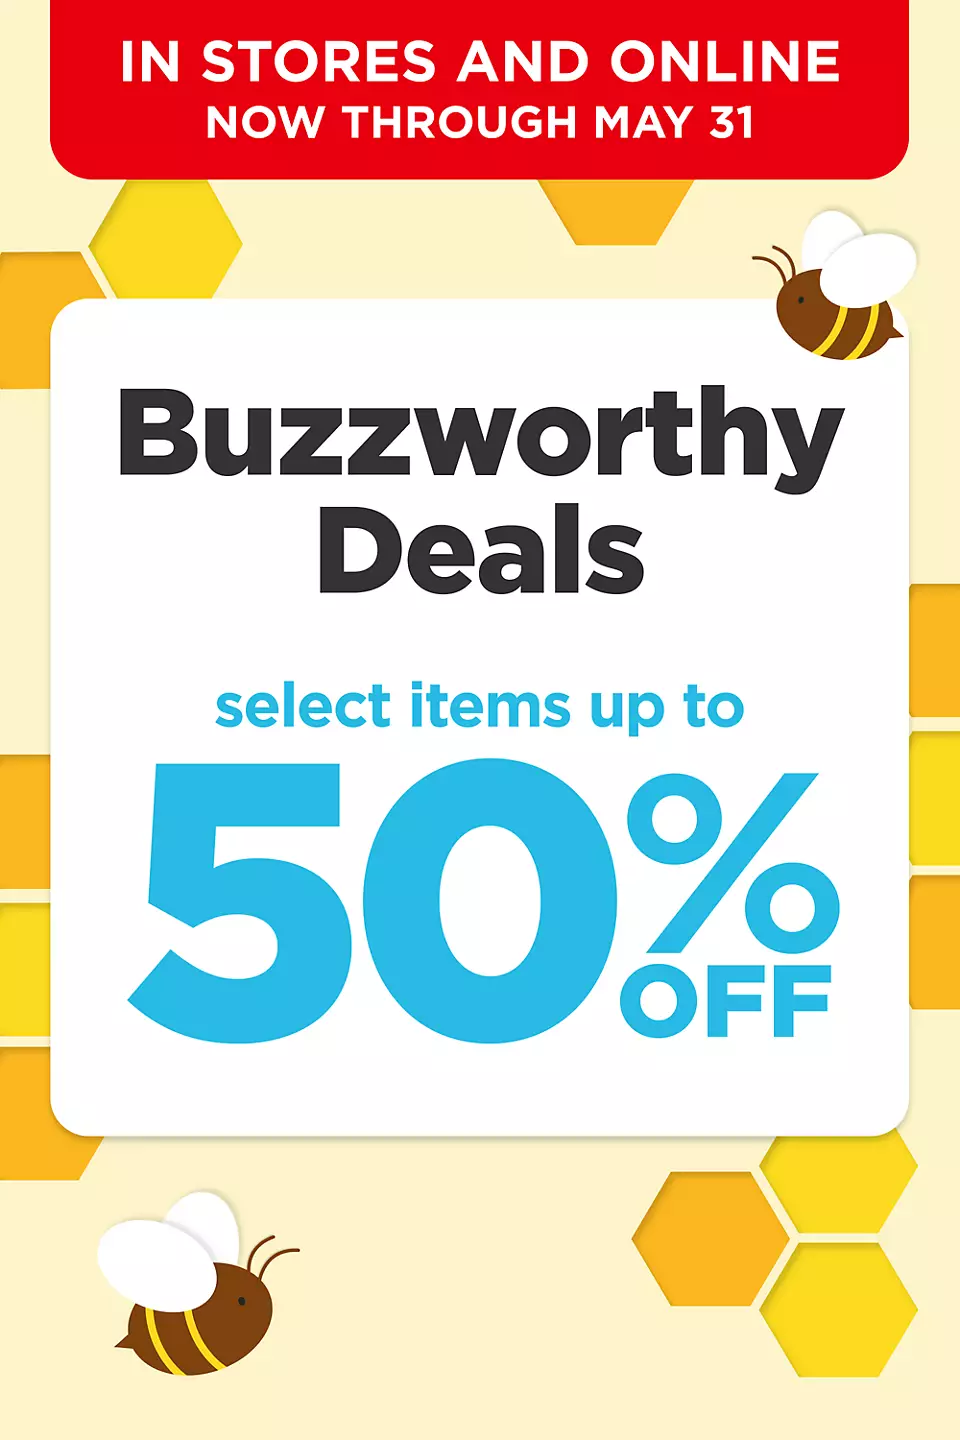 Buzzworthy deals in stores and online. Select items up to 50% off now through May 31. Click to shop now.